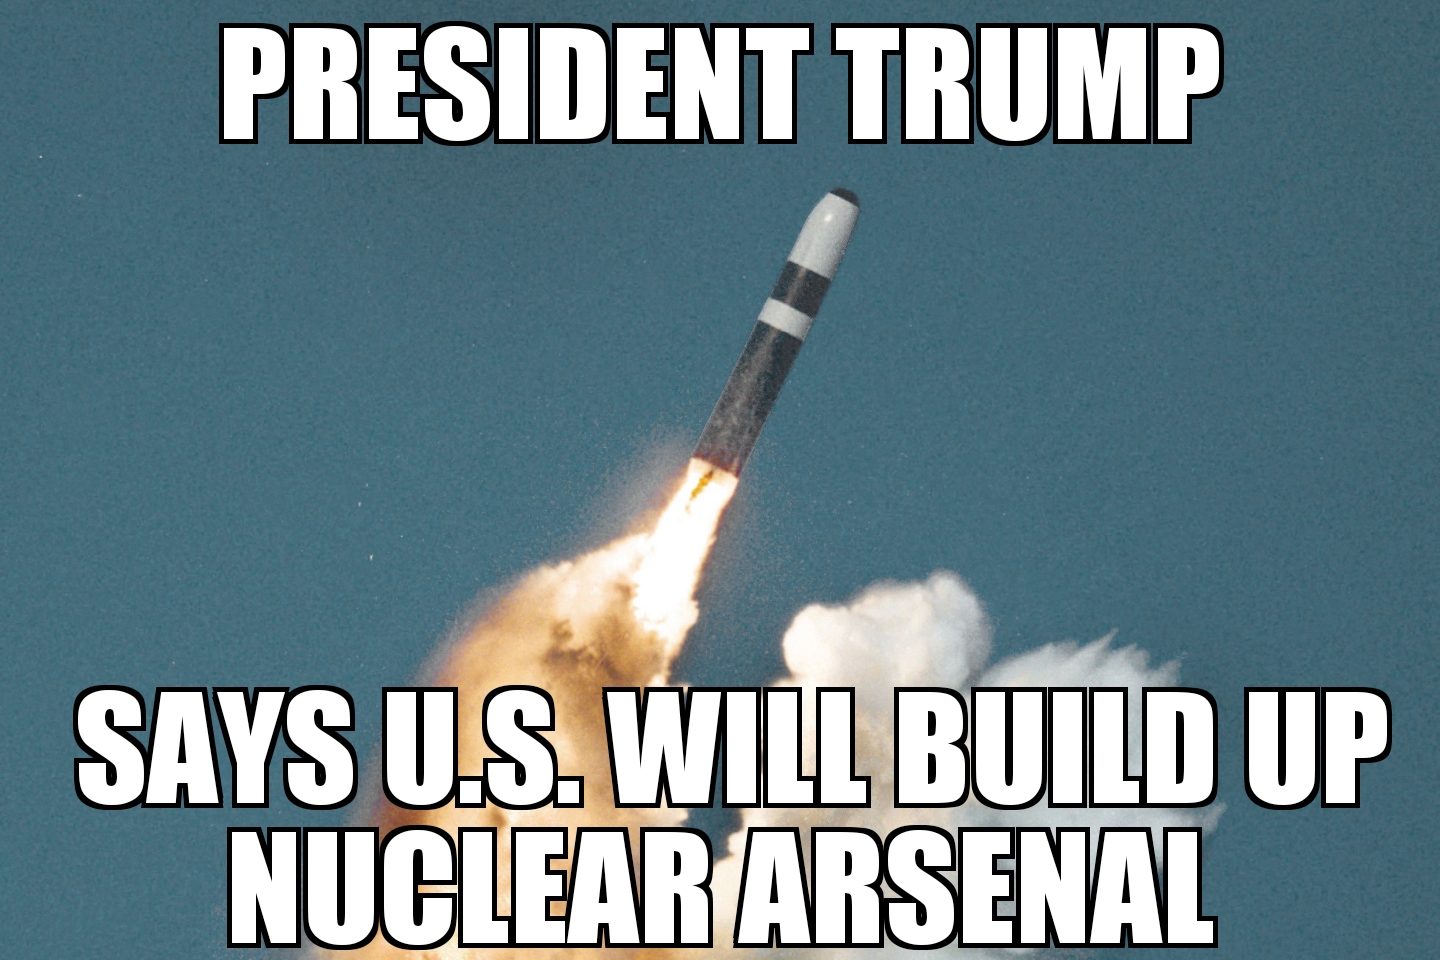 U.S. ‘to build up nuclear arsenal’